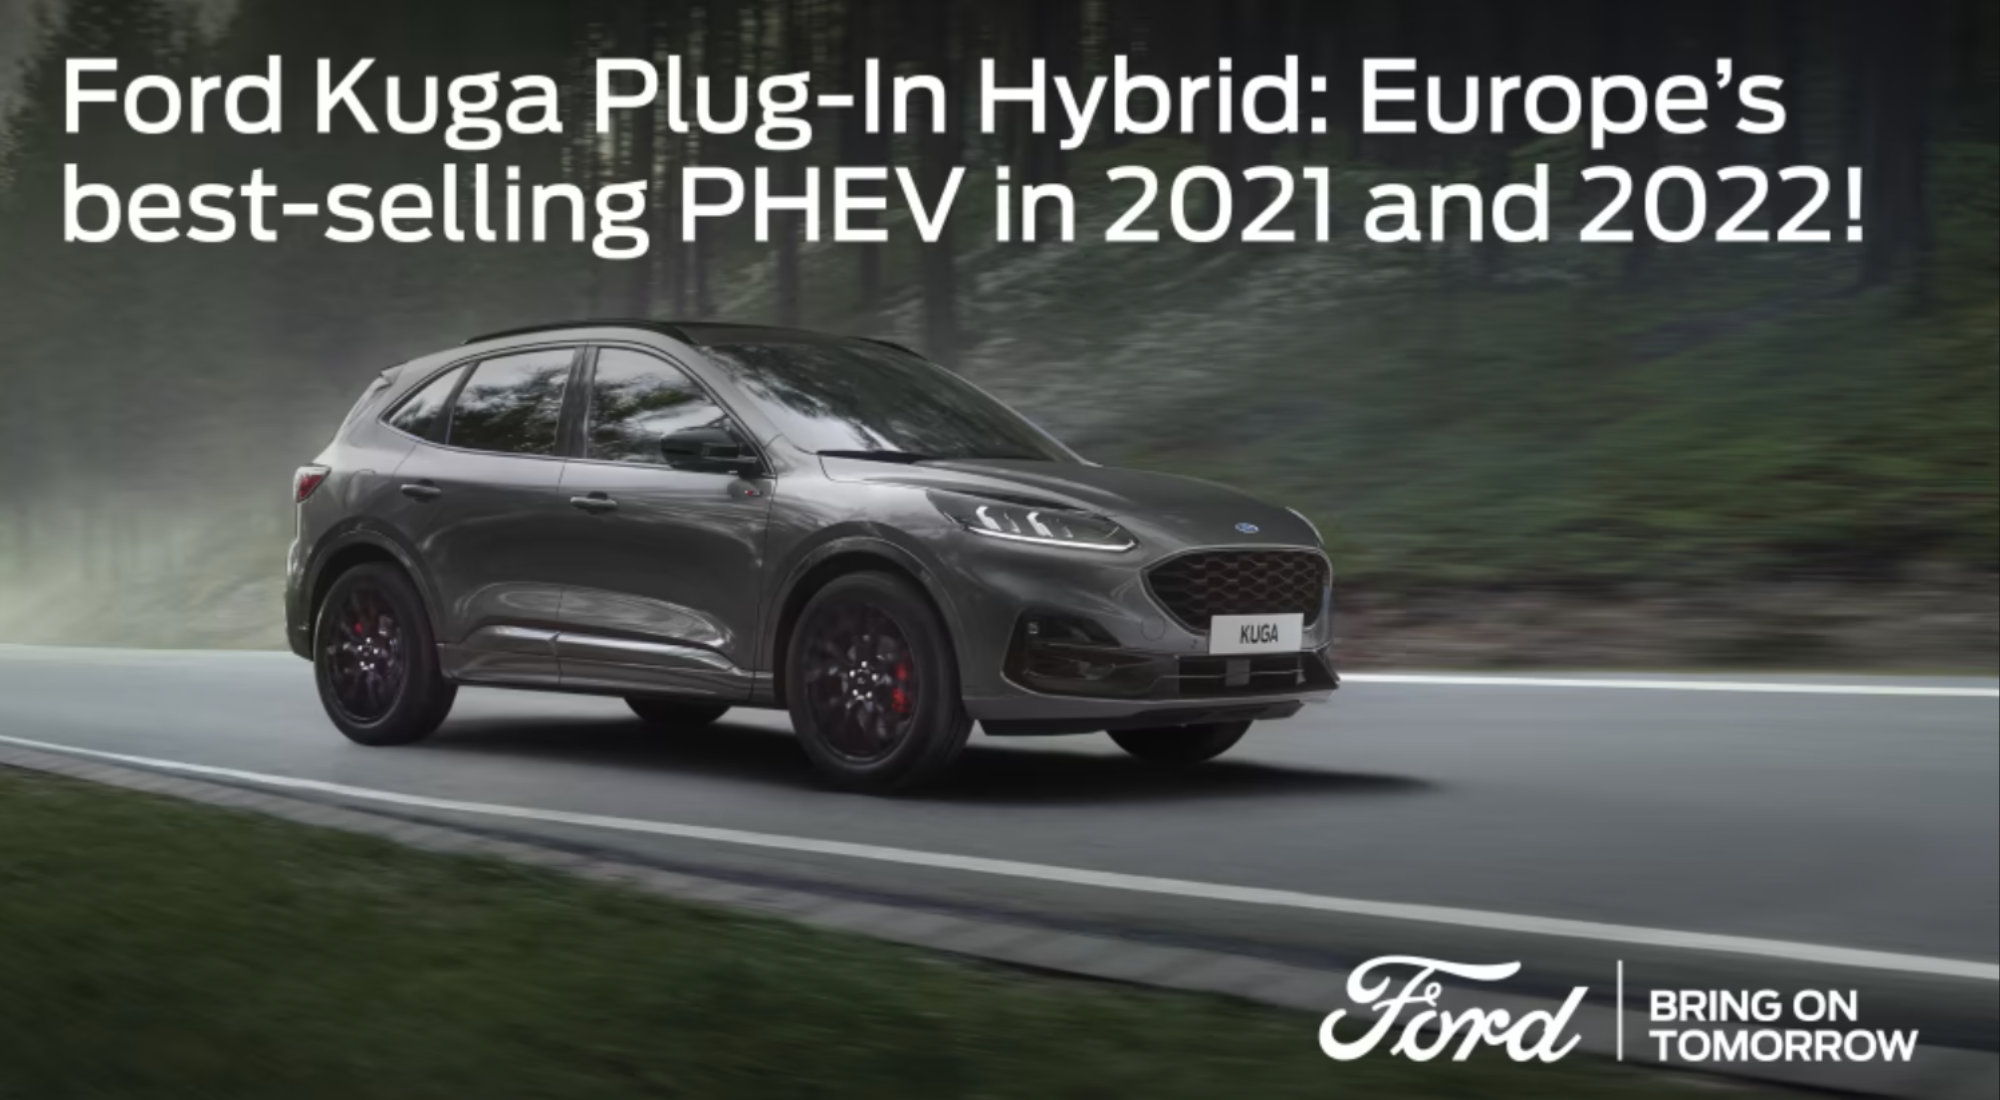 FORD KUGA PLUG-IN HYBRID IS EUROPE'S BEST-SELLING PHEV FOR A SECOND YEAR IN  SUCCESSION